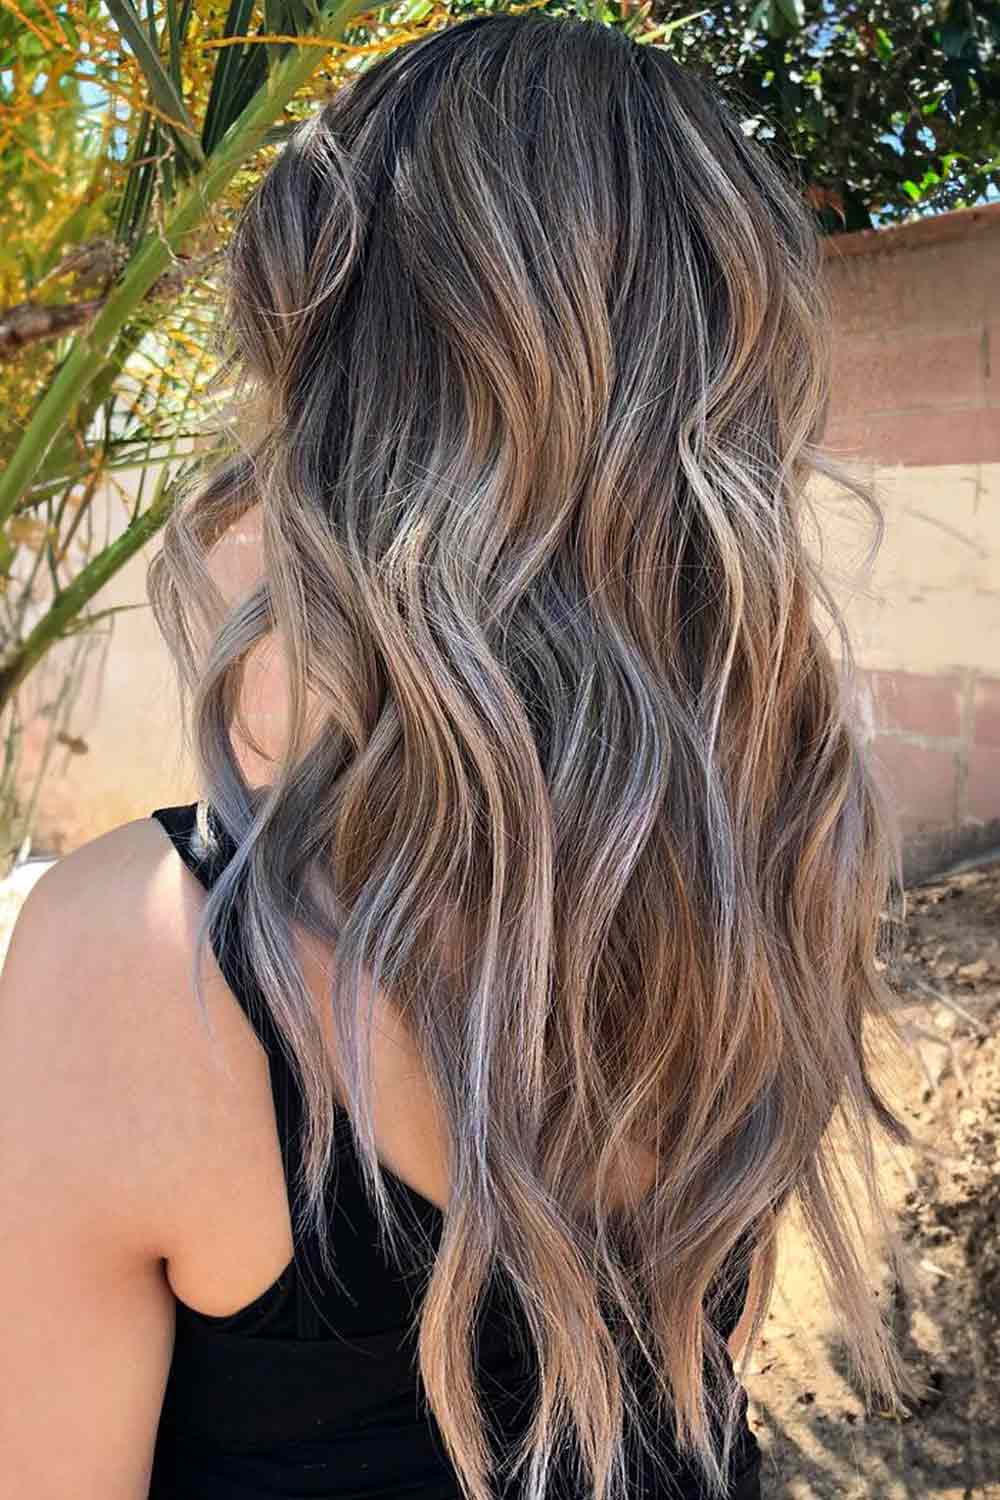 Dirty Blonde Hairstyles With Blue Tips #dirtyblondehair #dirtyblonde #blondehair #blonde